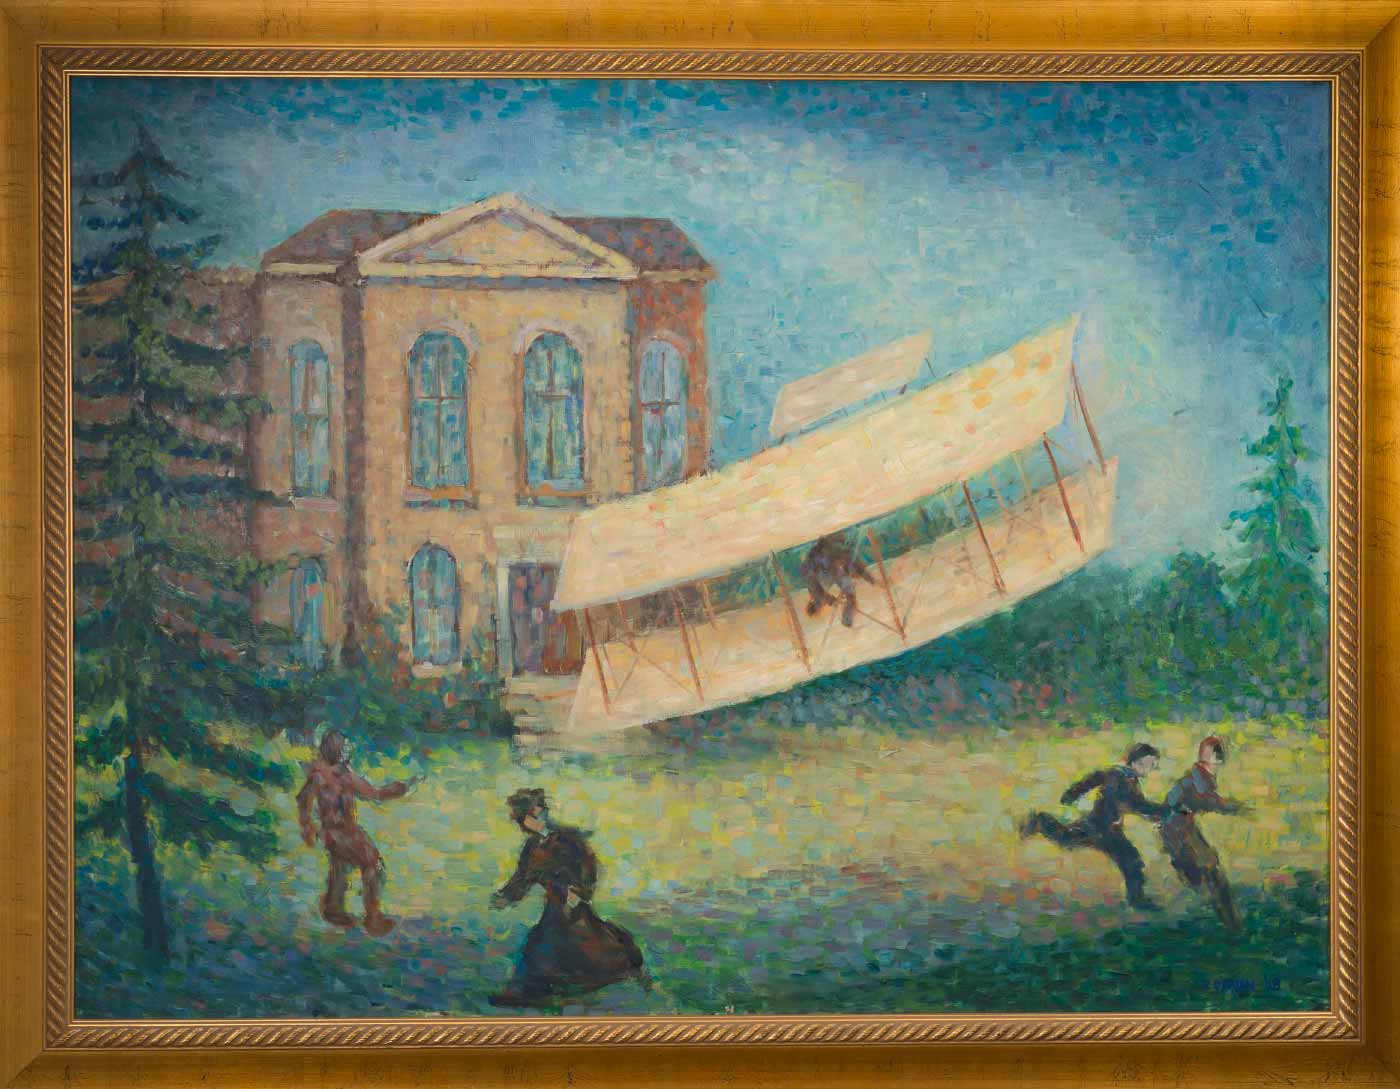 Painting by Richard (Dick) O’Brien ’58 depicting a glider experiment by professor Albert Francis Zahm. The painting which once hung in LaFortune Student Center now hangs in the Hessert Aerospace research building.